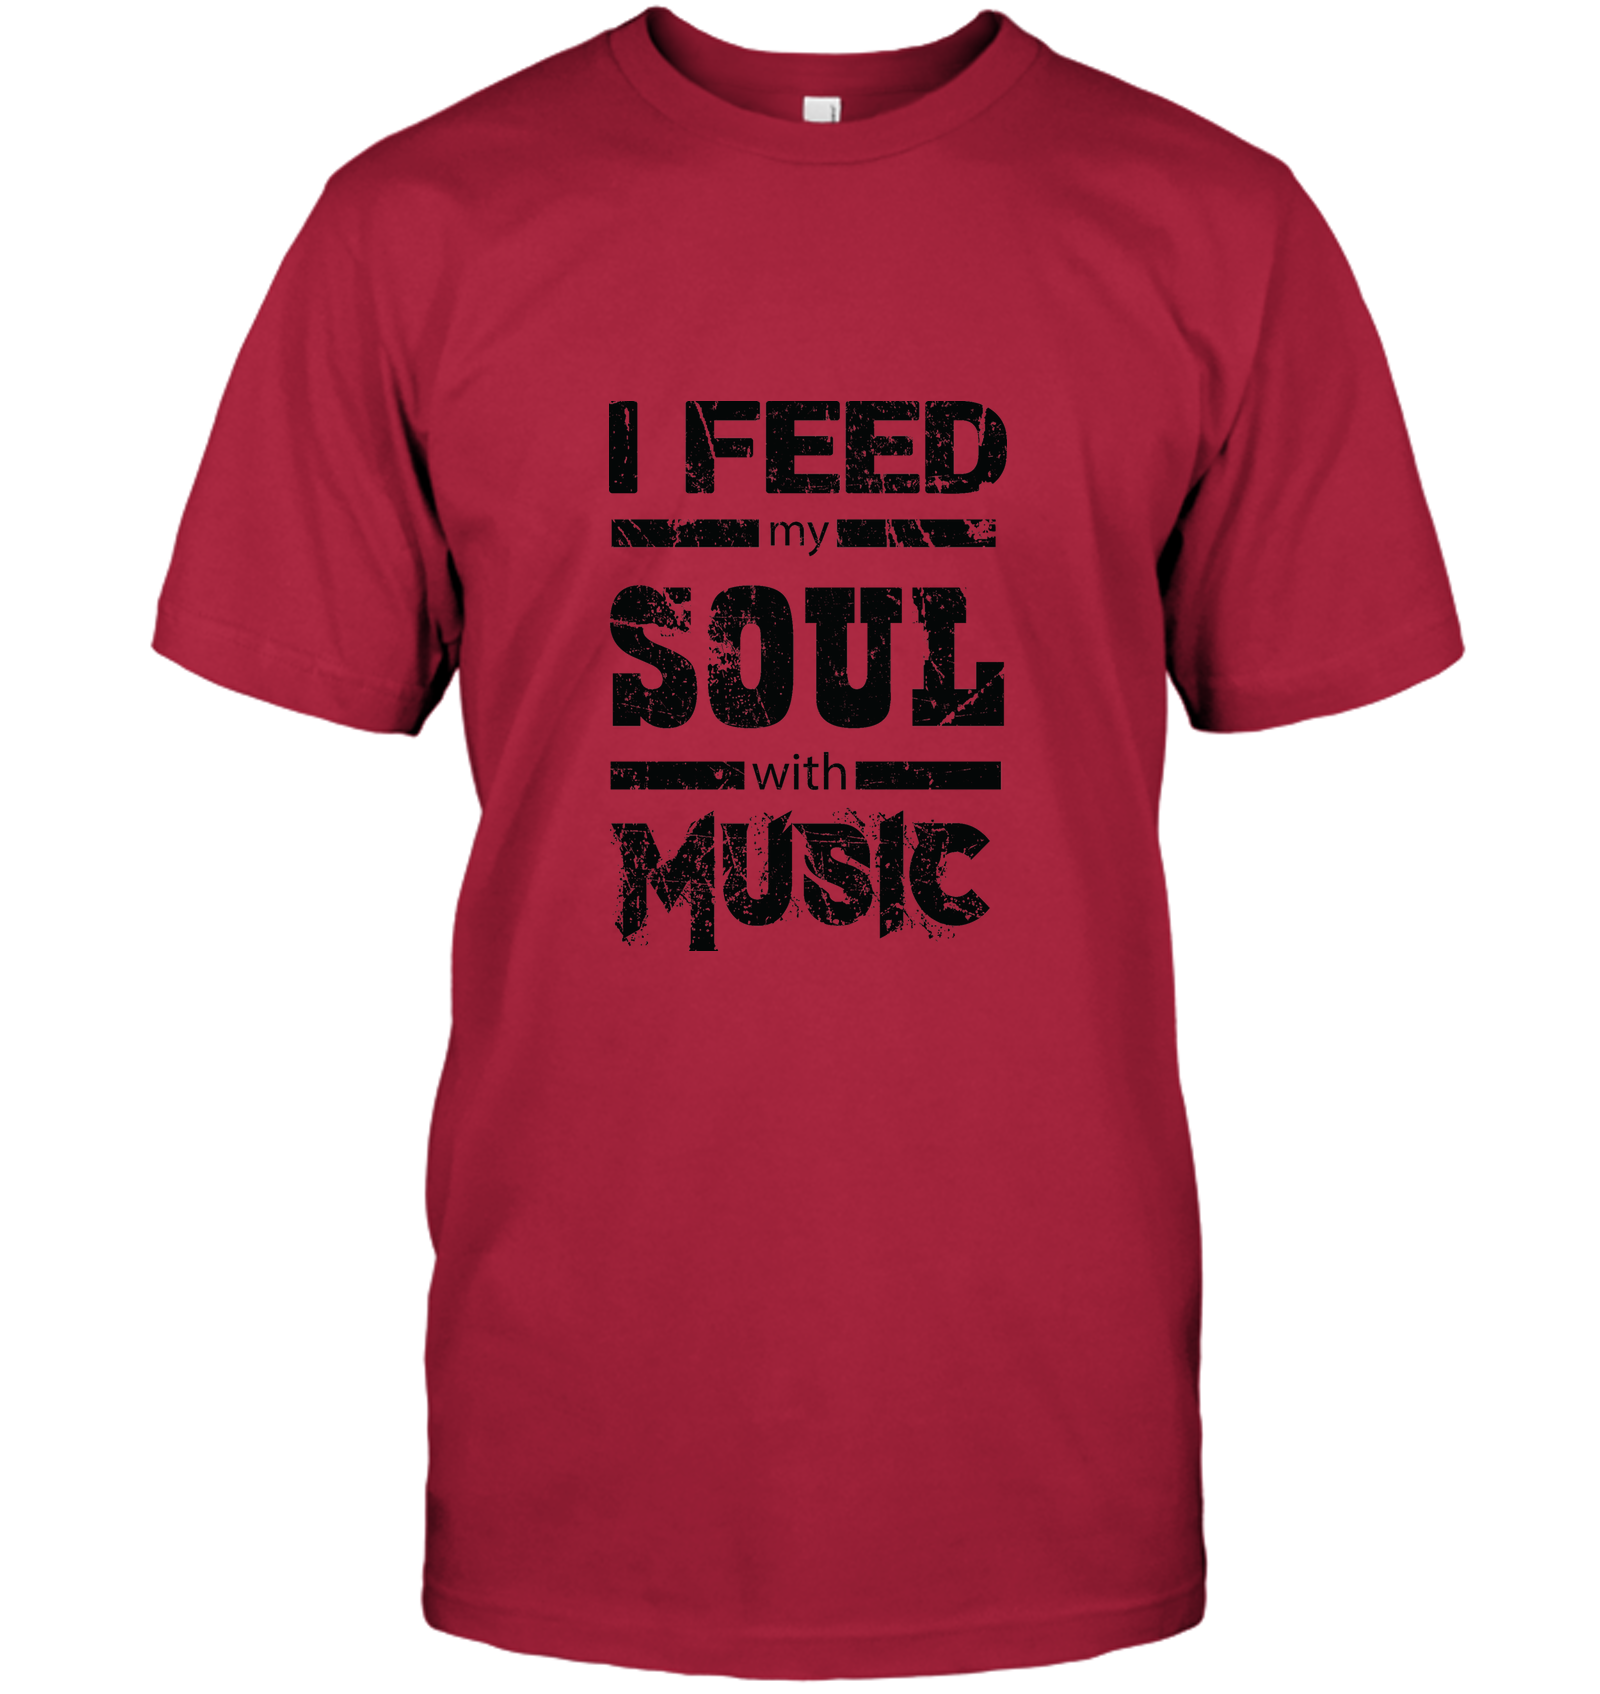 I Feed My Soul With Music - Hanes Adult Tagless® T-Shirt